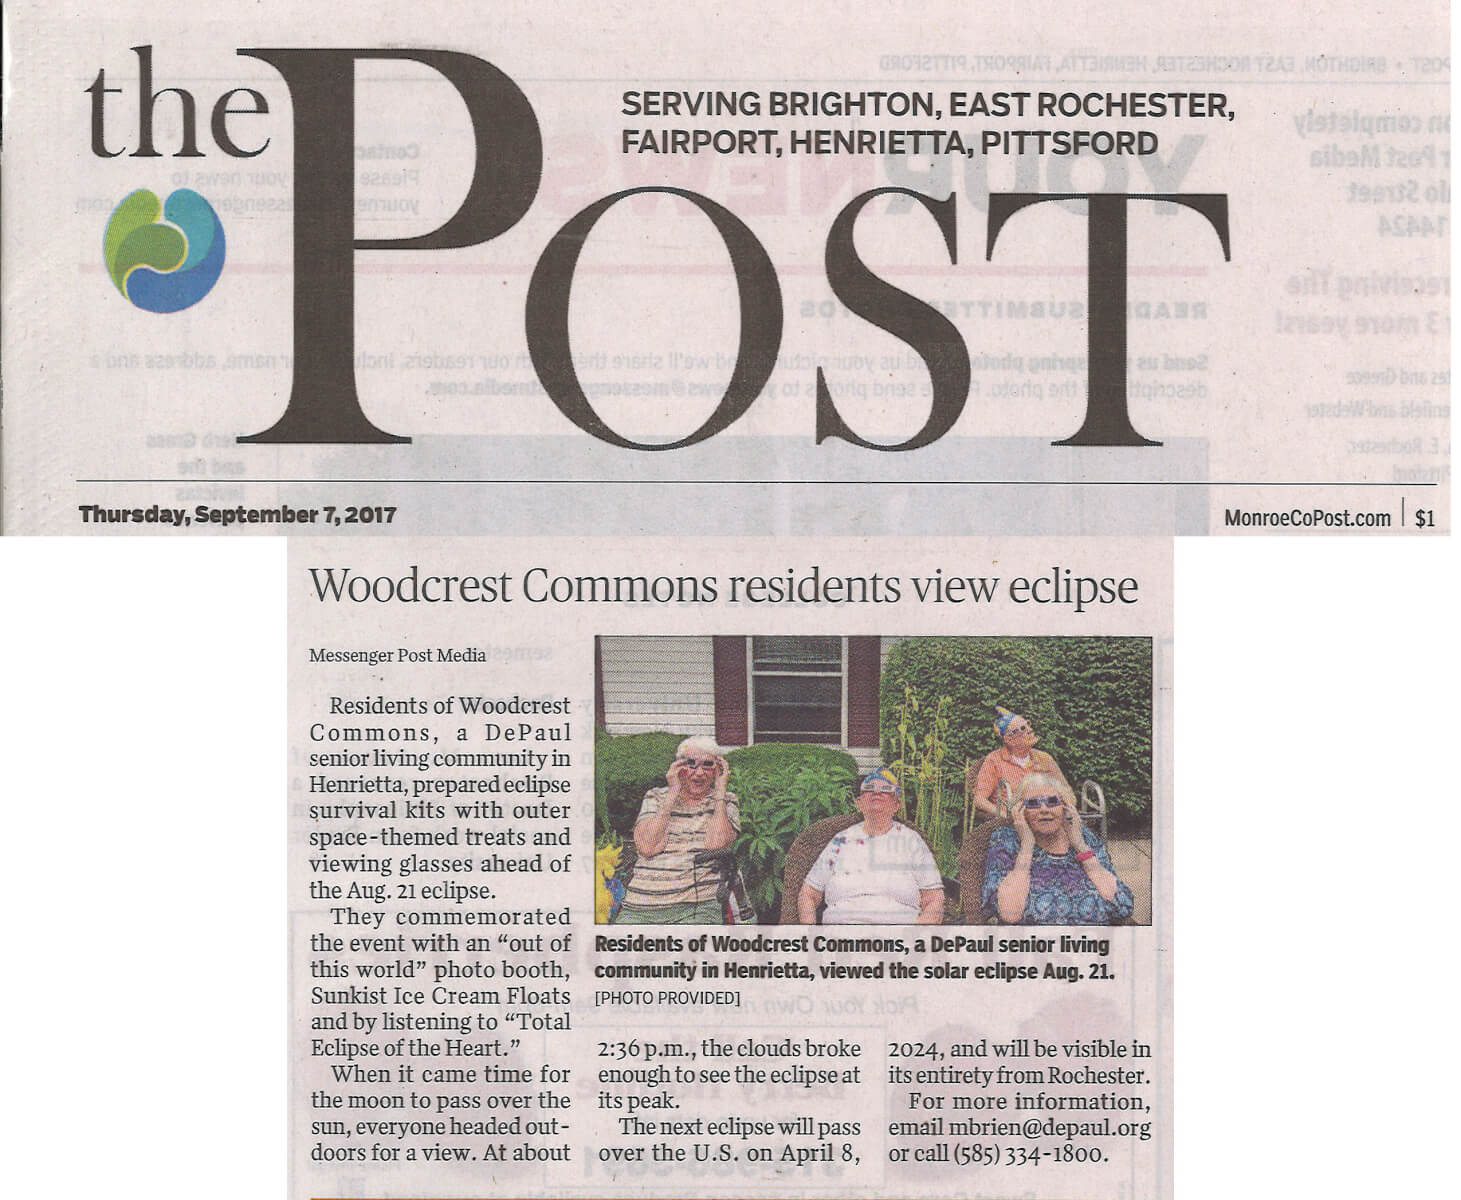 Woodcrest Commons' residents view the eclipse, story in The Post September 7, 2017